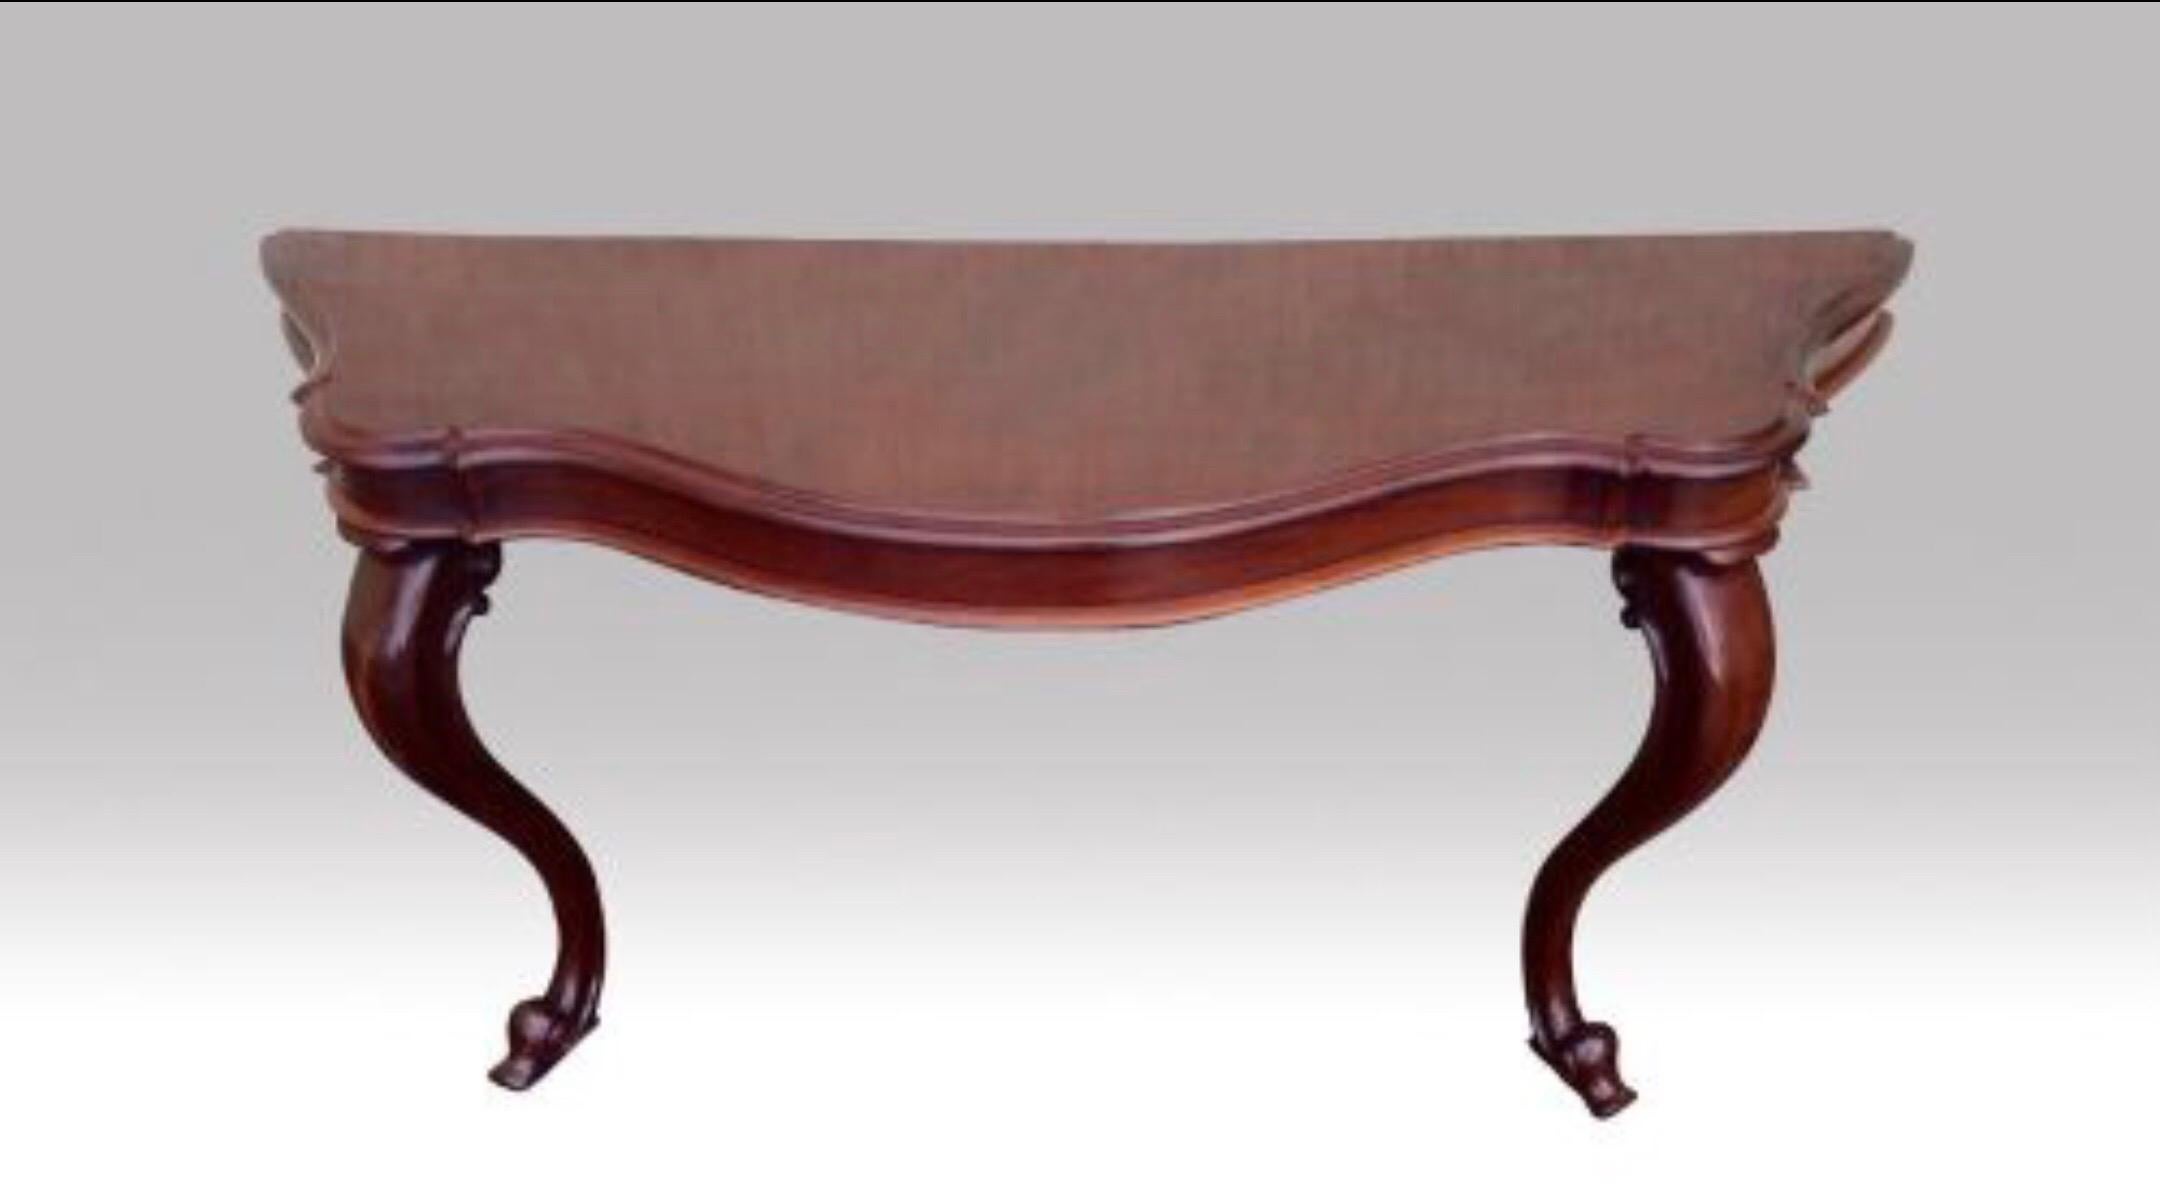 Victorian Fine Quality 19th Century Mahogany Antique Narrow Console Table/Hall Table